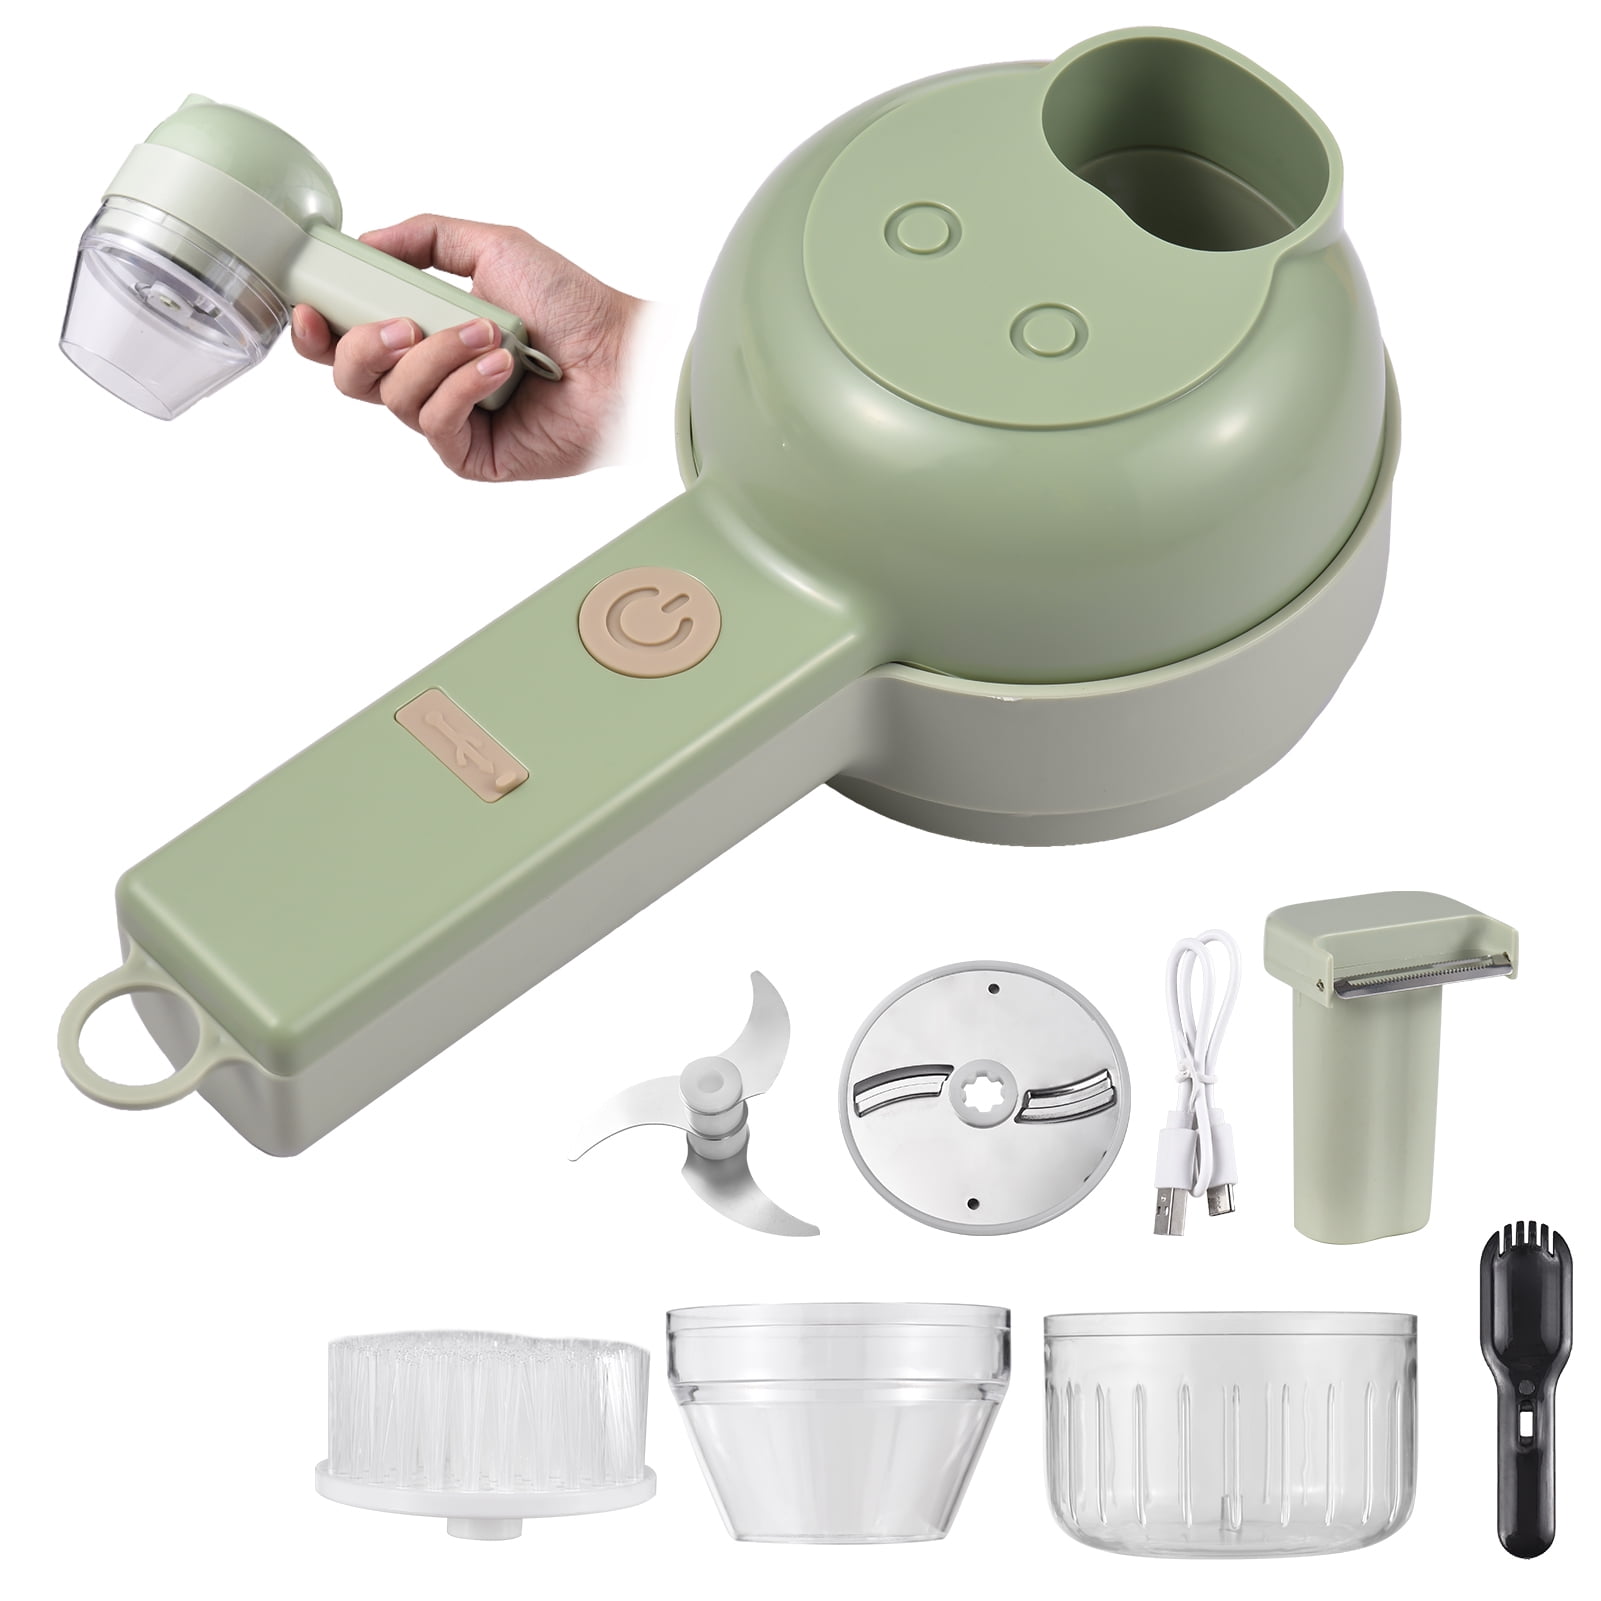 AllStyleByPatel Smart Gadgets [4 in 1] Electric Slicer and Cutter Vegetable  Chopper Hand-held Food Processor Portable (Green)